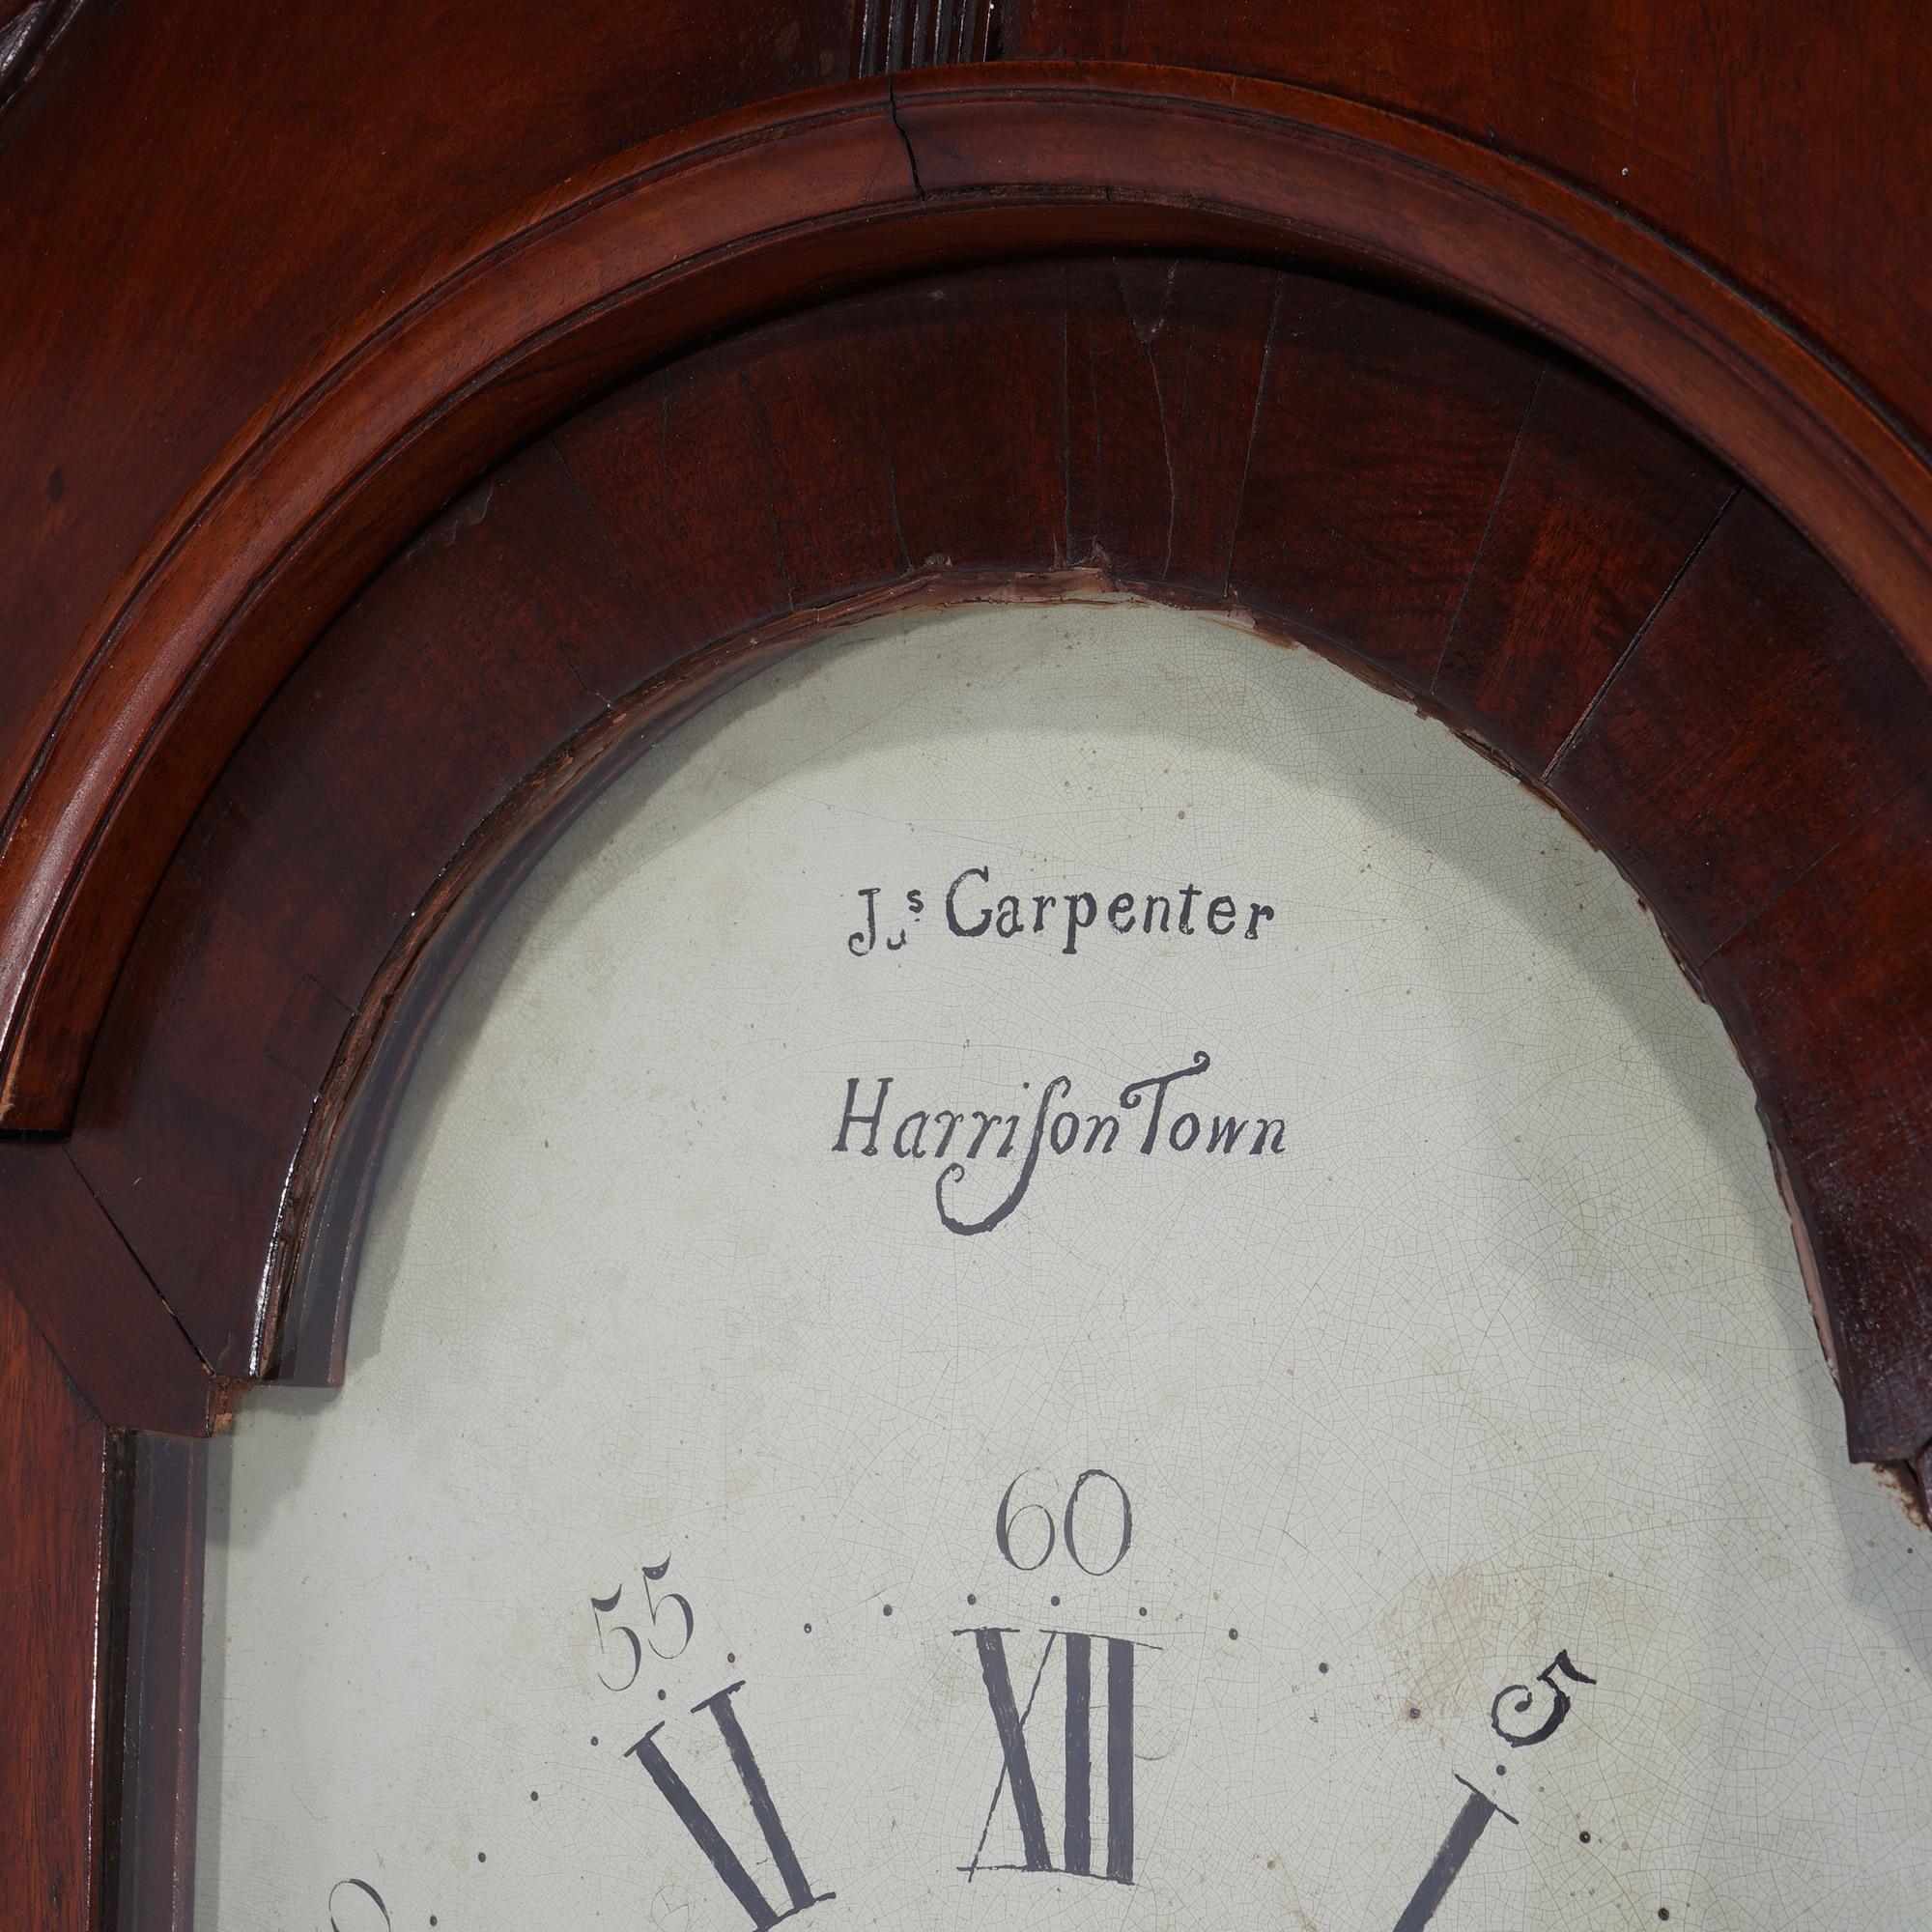 ***Ask About Reduced In-House Delivery Rates - Reliable Professional Service & Fully Insured***
Antique English J. Carpenter Harris Town Flame Mahogany Grandfather Clock with Broken Arch Crest & Brass Finials 19thC

Measures - 93